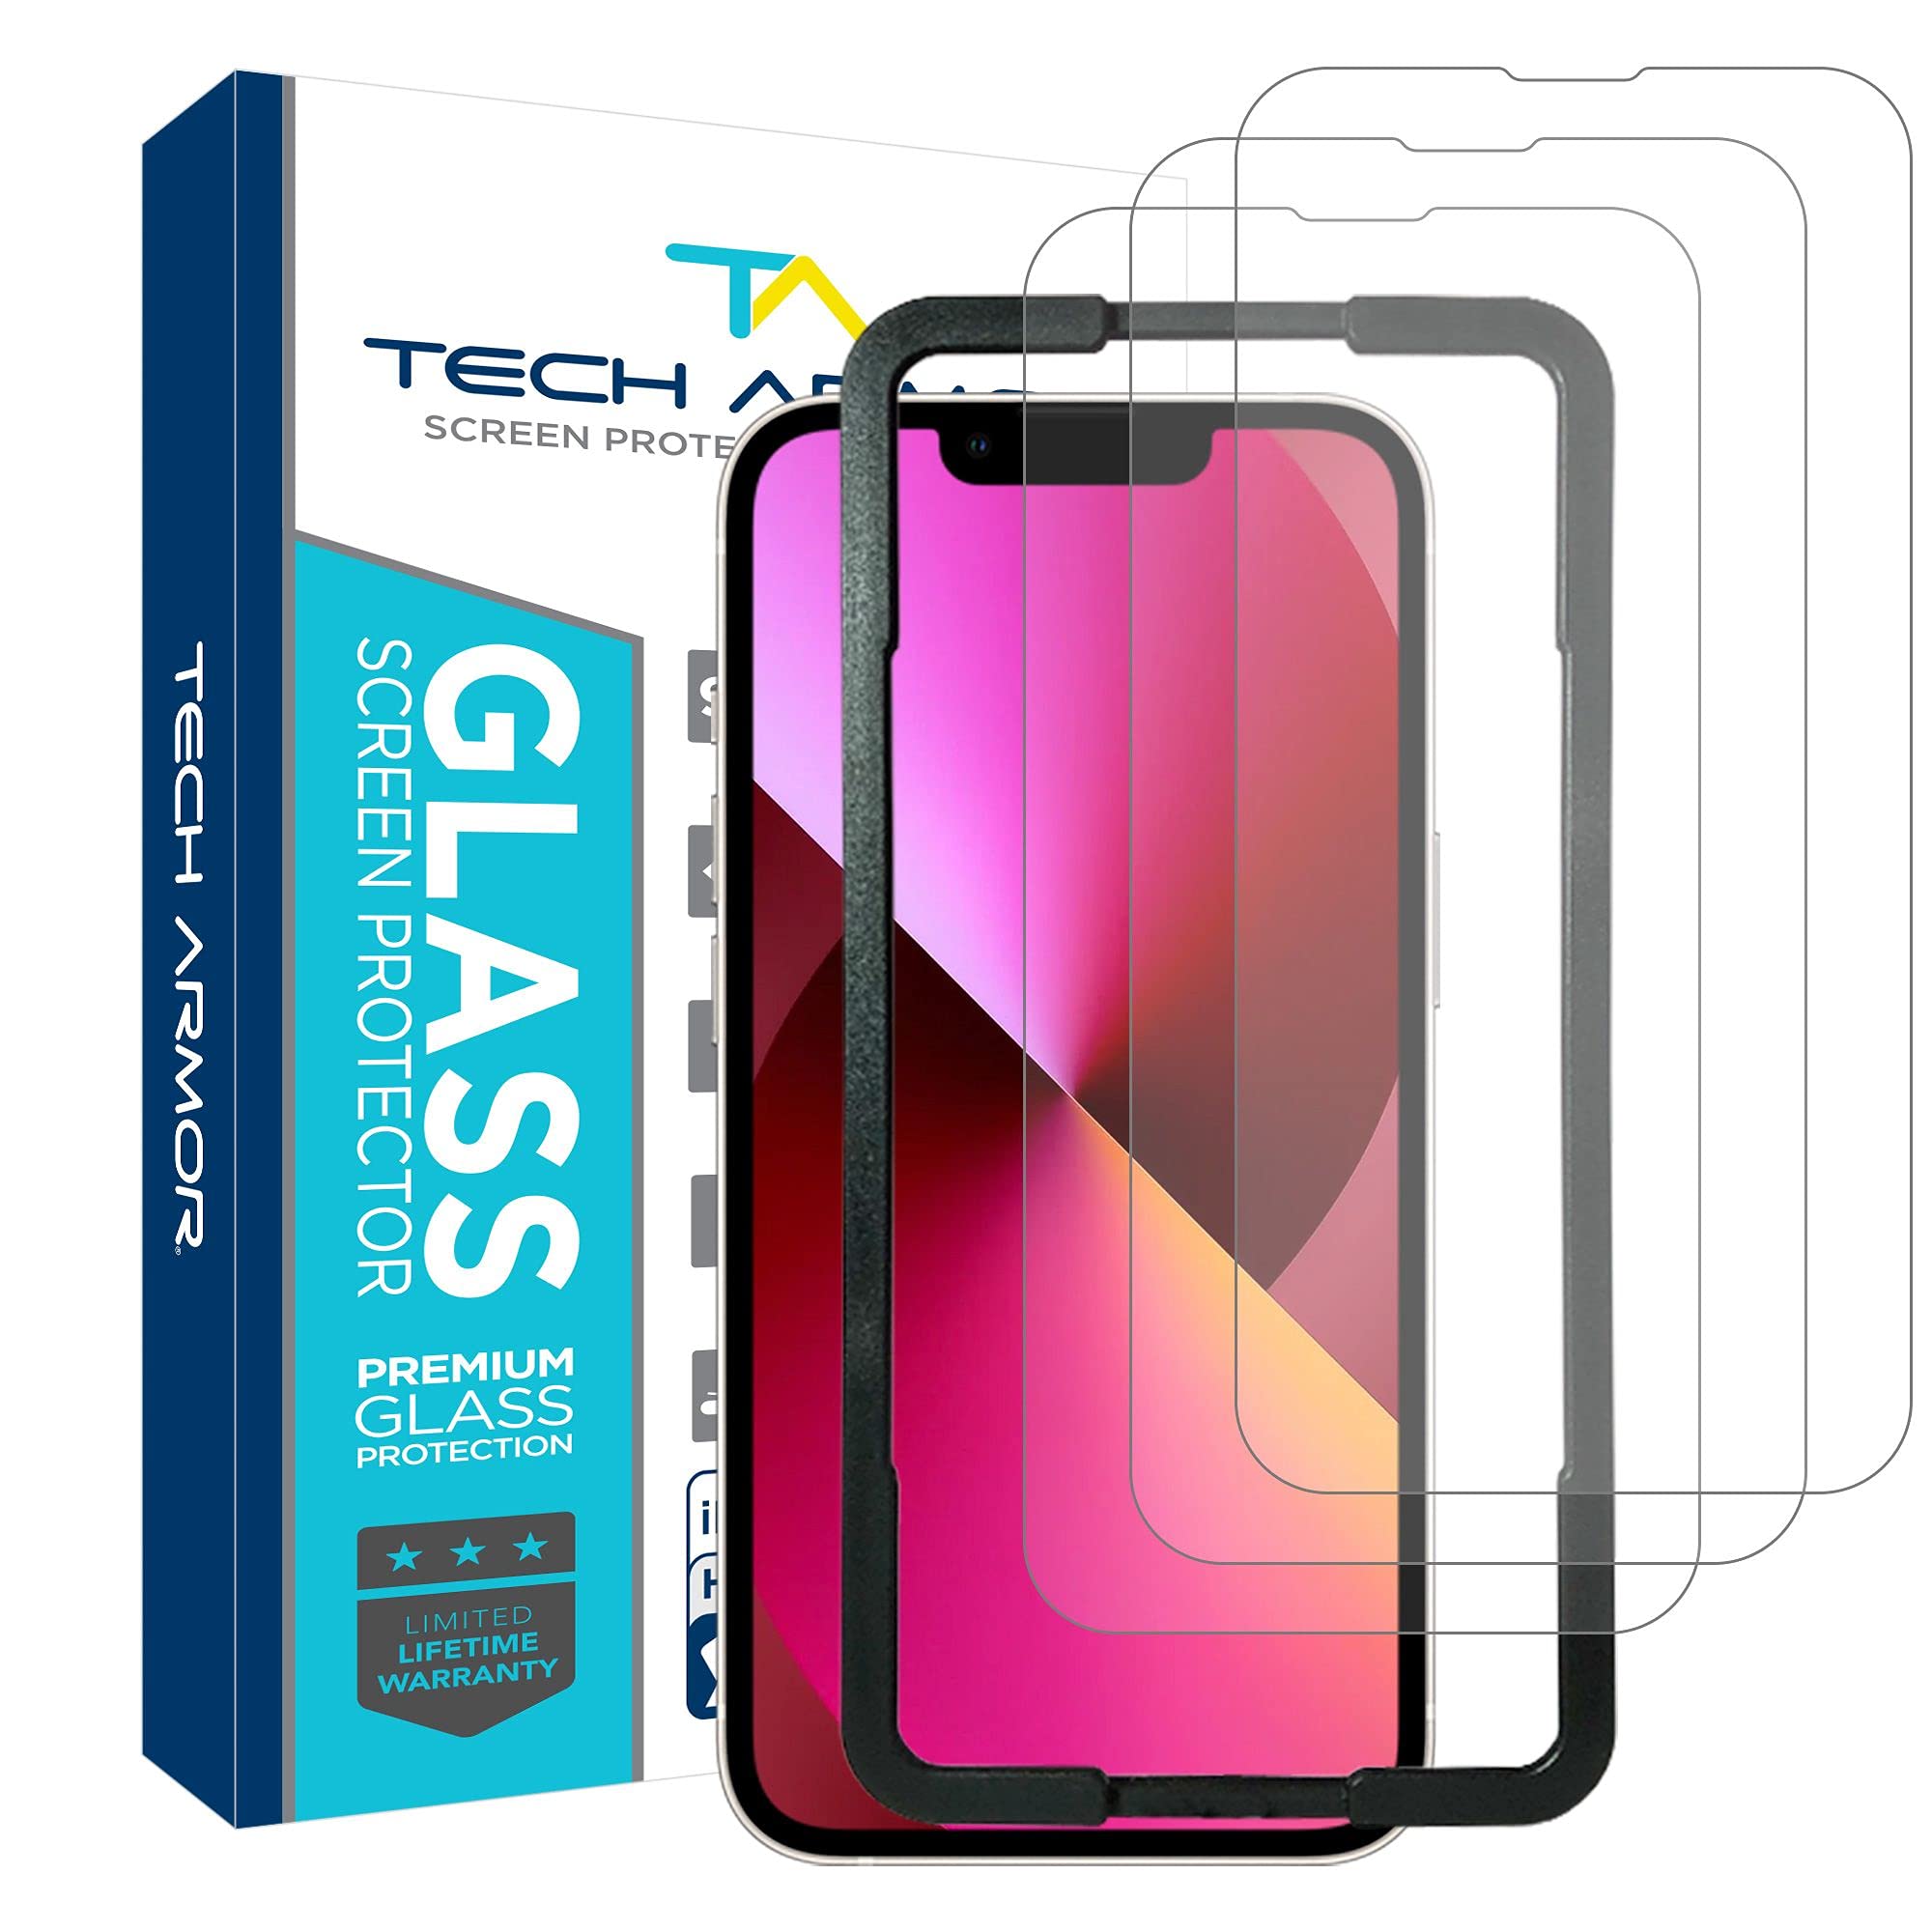 G-Armor 2 Pack Screen Protector for Samsung Galaxy S21 FE 5G (FE Version  Only) - Tempered Glass Screen Saver, Phone Case Friendly, Lifetime